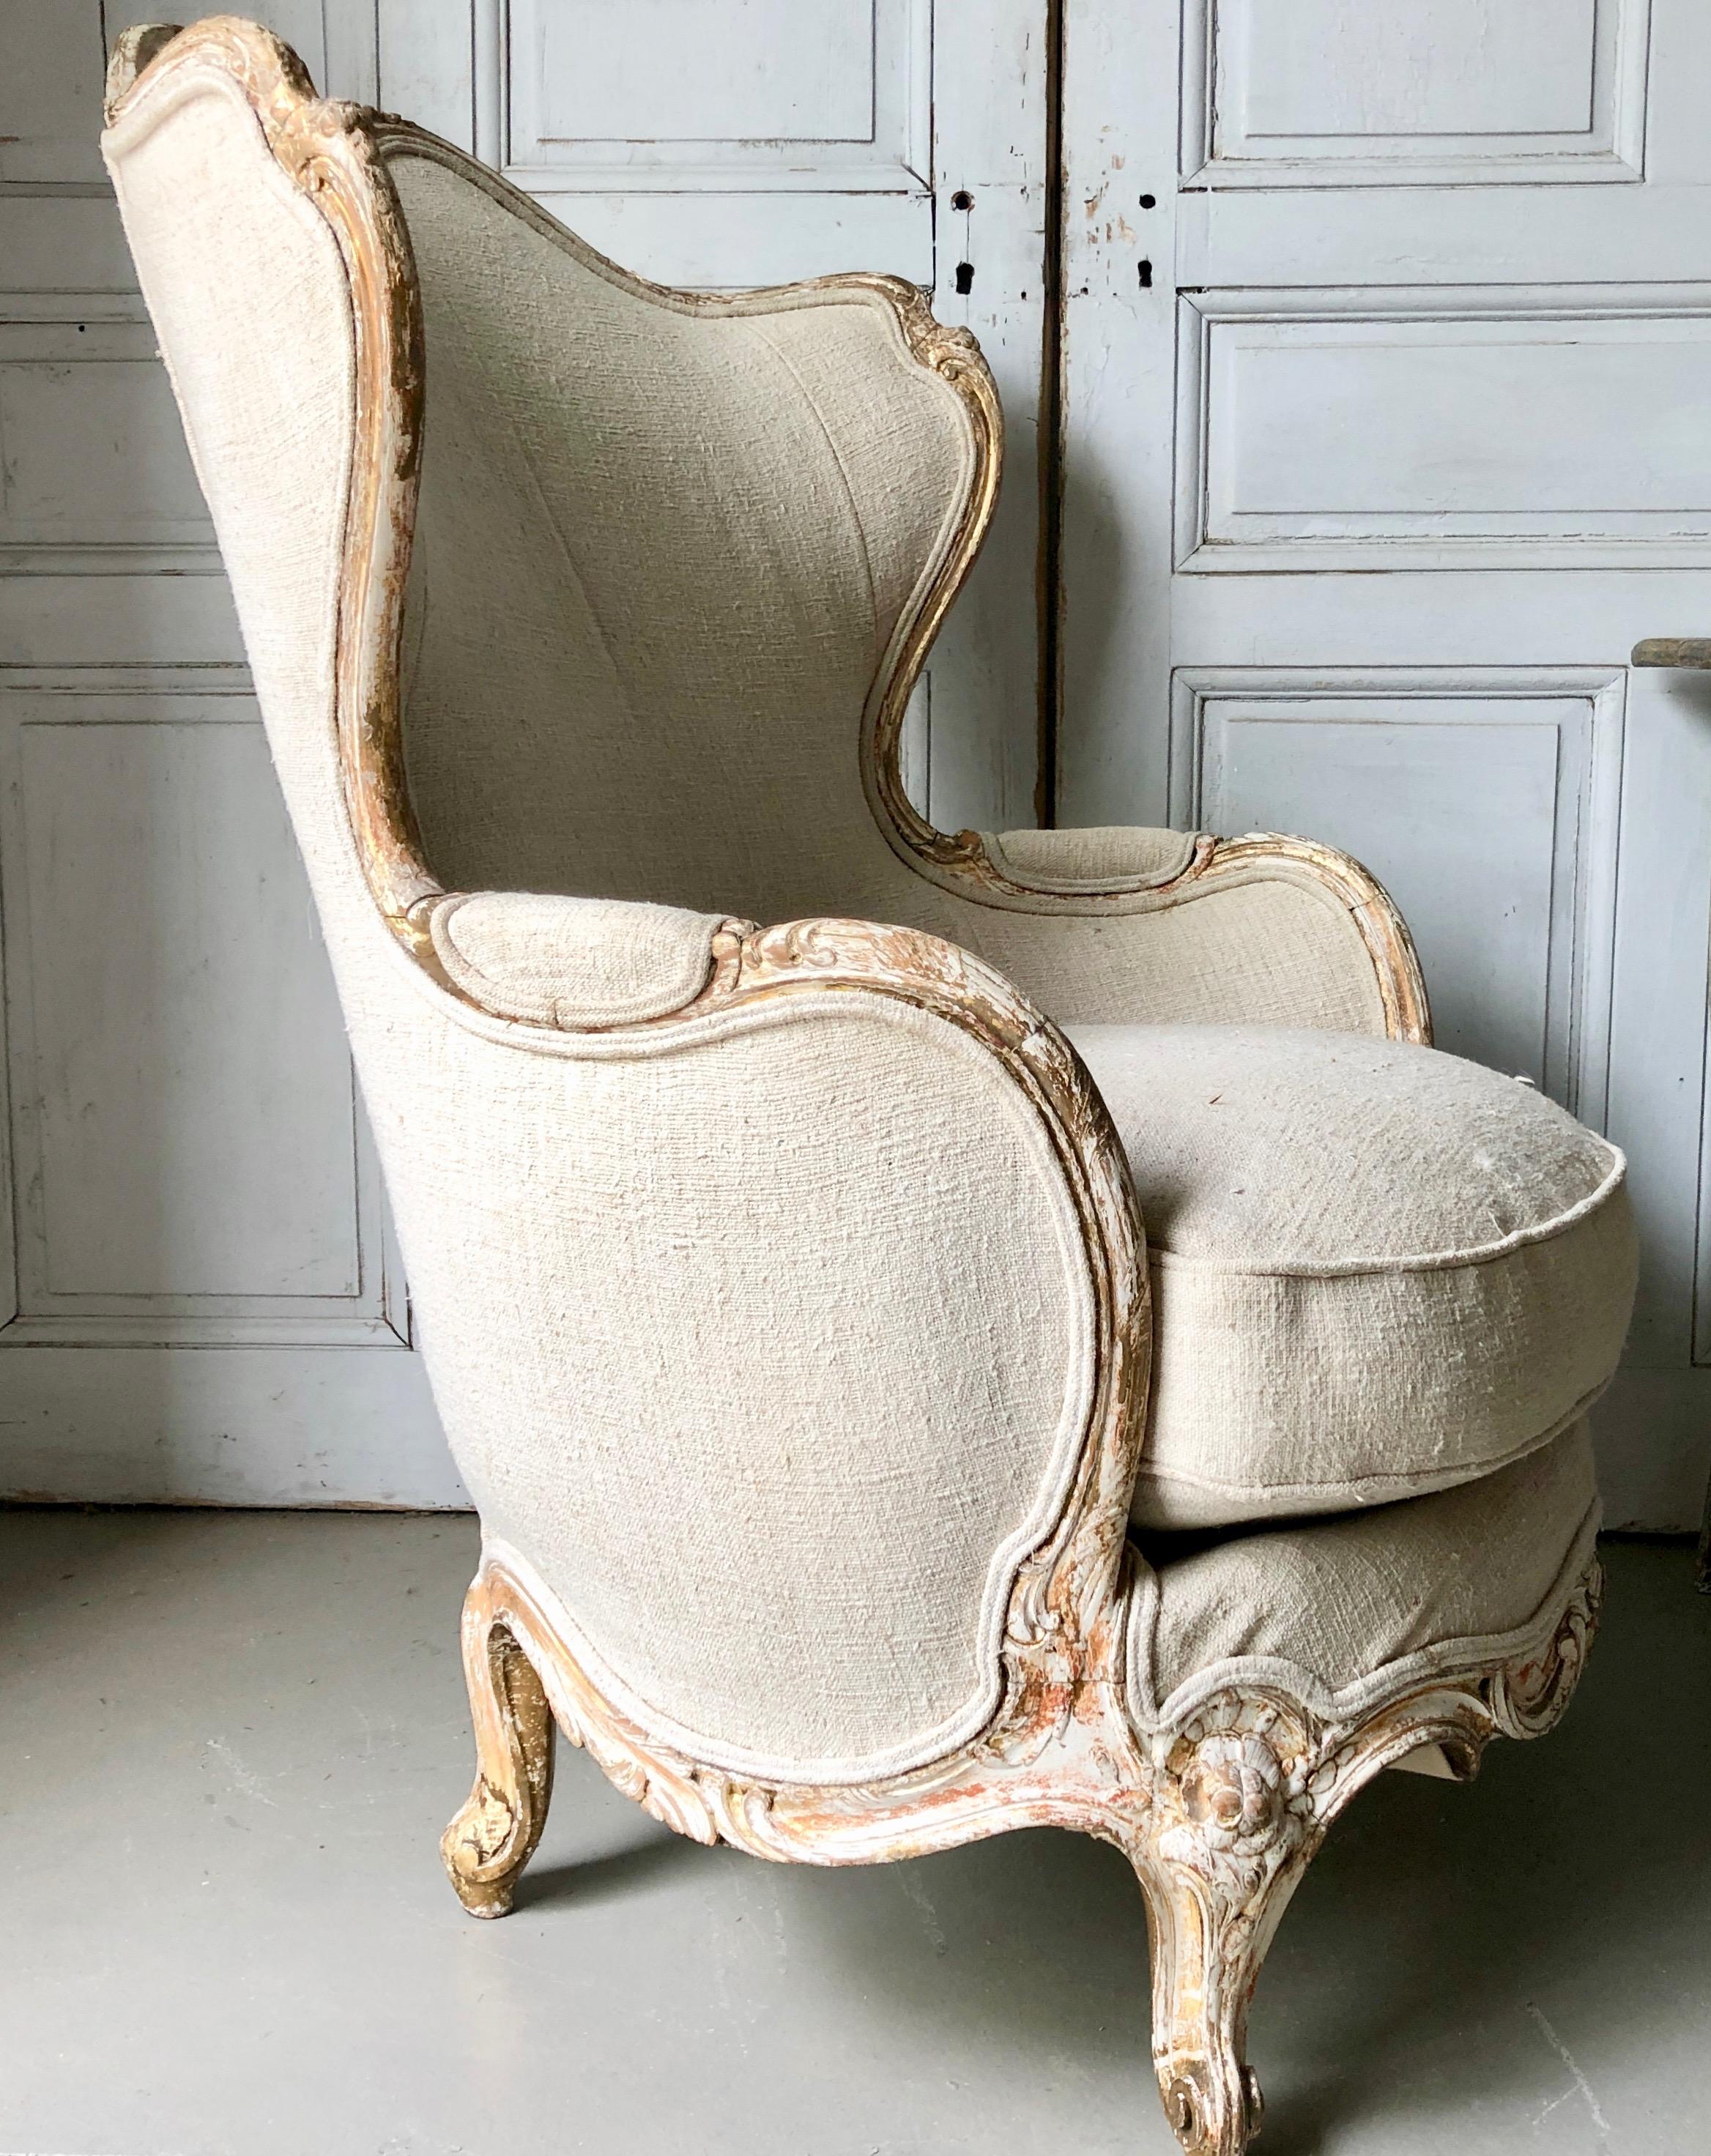 19th century French very wide and rare Bergère, Louis XV style with coved back which sweep without a break in to the armrests. Richly carved back and seat rails on elegant cabriole legs with flower carvings. Upholstered beautifully in hand spun